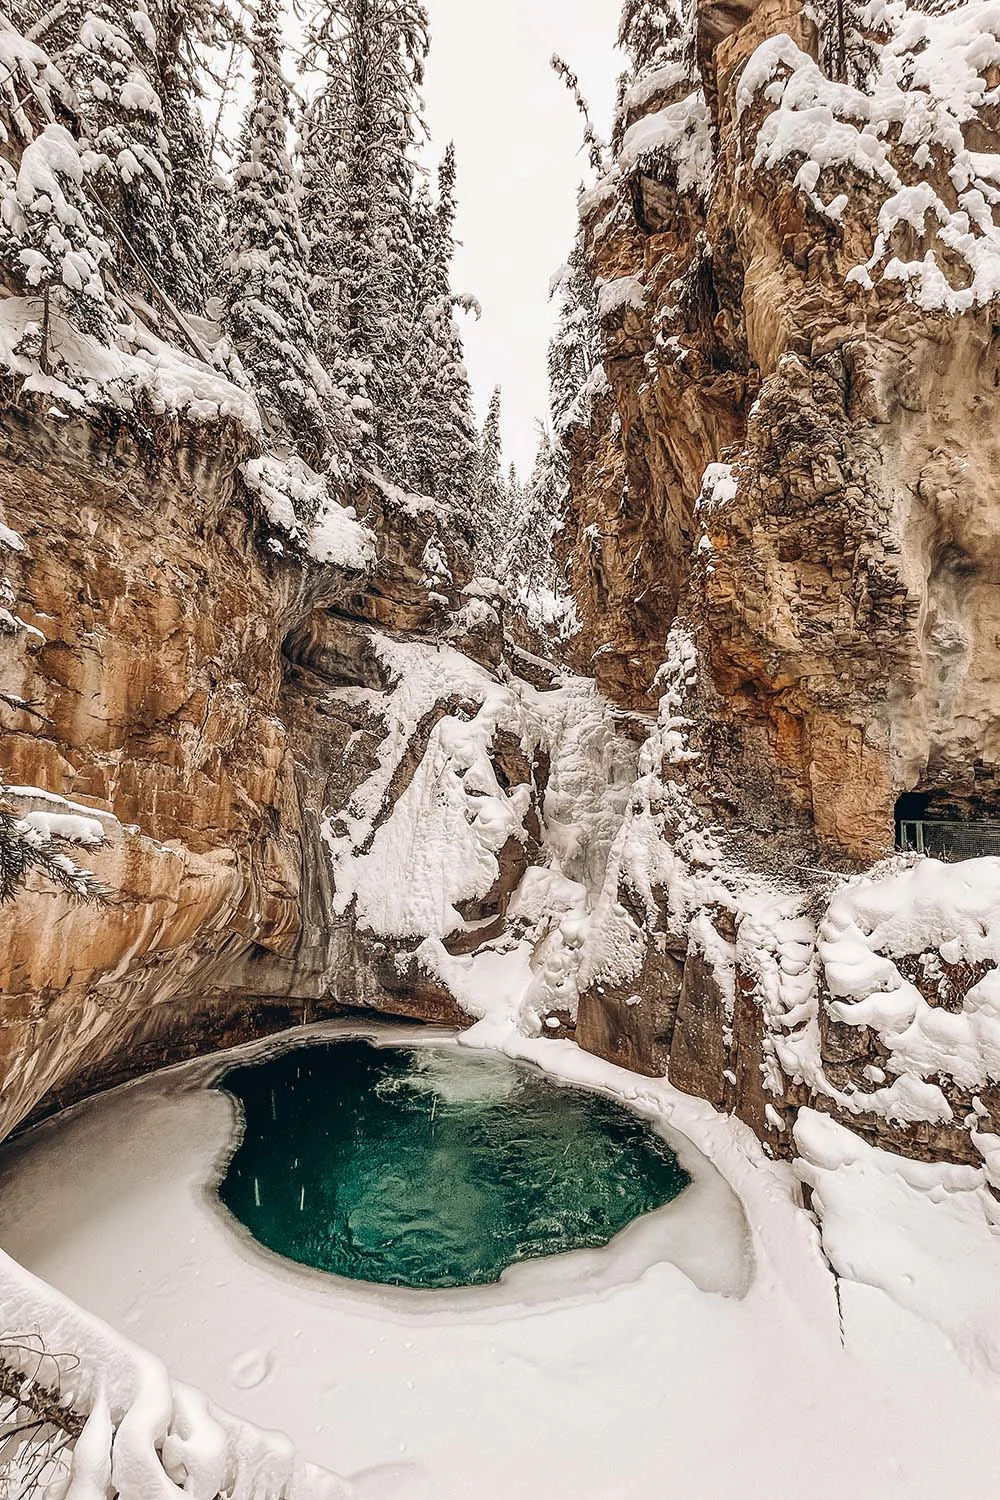 Banff is absolutely incredible. Although most people visit Banff when the weather is warmer, it's absolutely magical to visit in winter. Here's a local's guide to some of the best things to do in in Banff in winter. From hikes and trails to winter sports, family friendly excursions, dining experiences and more. You won't want to miss this guide that will surely convince you to add Banff in winter to your travel bucket list. Pictured here: Johnston Canyon lower falls trail